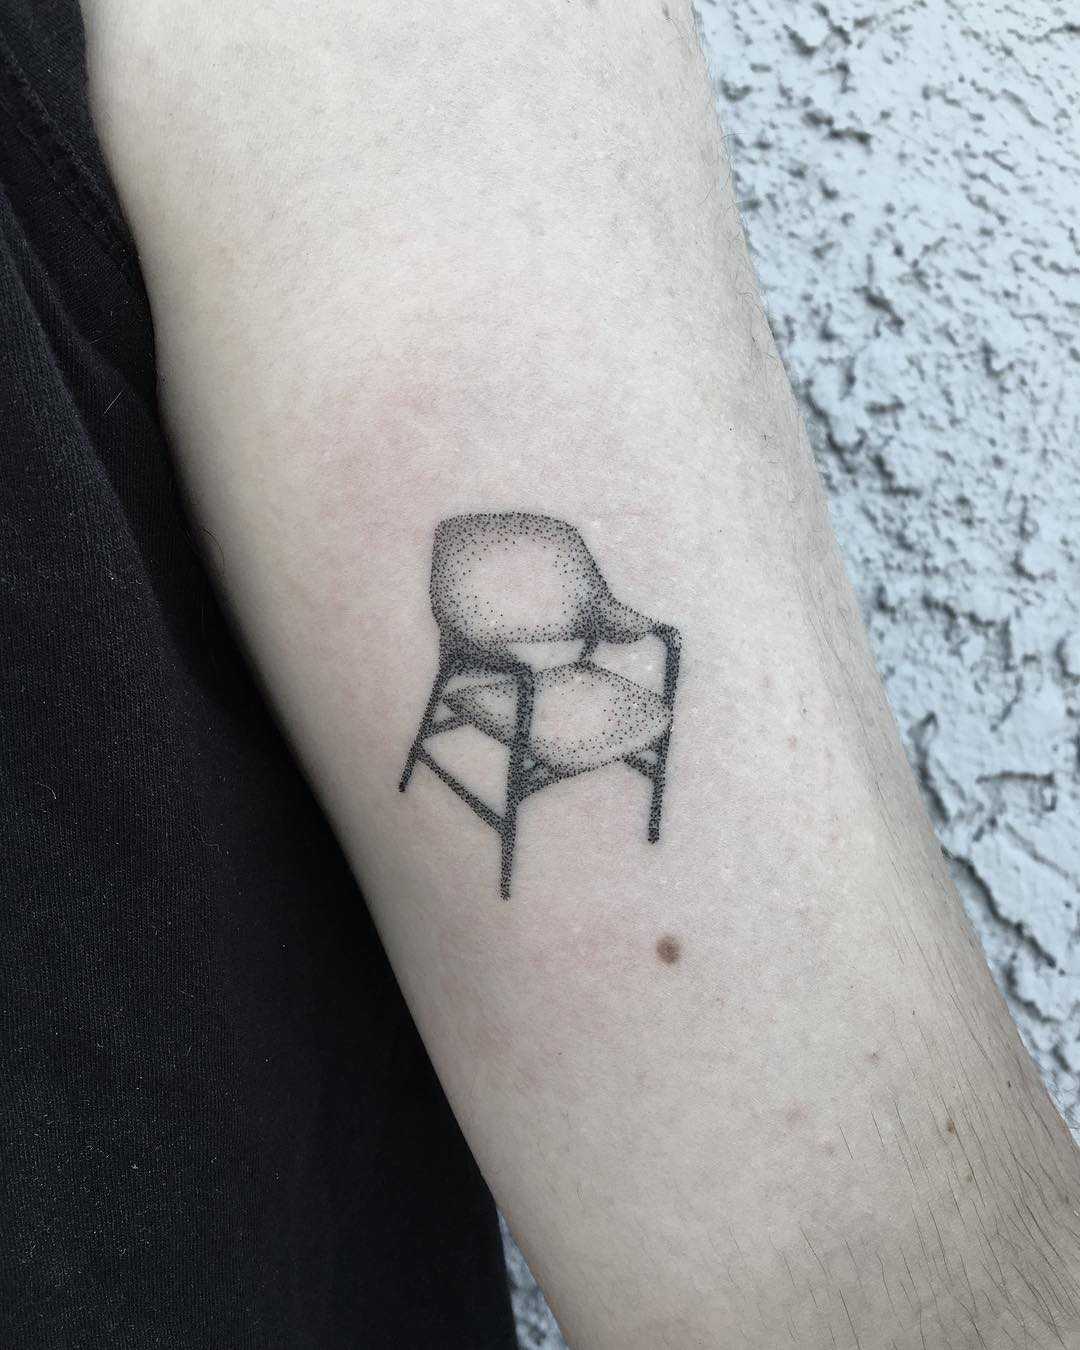 Dot-work chair tattoo by Robbie Ra Moore